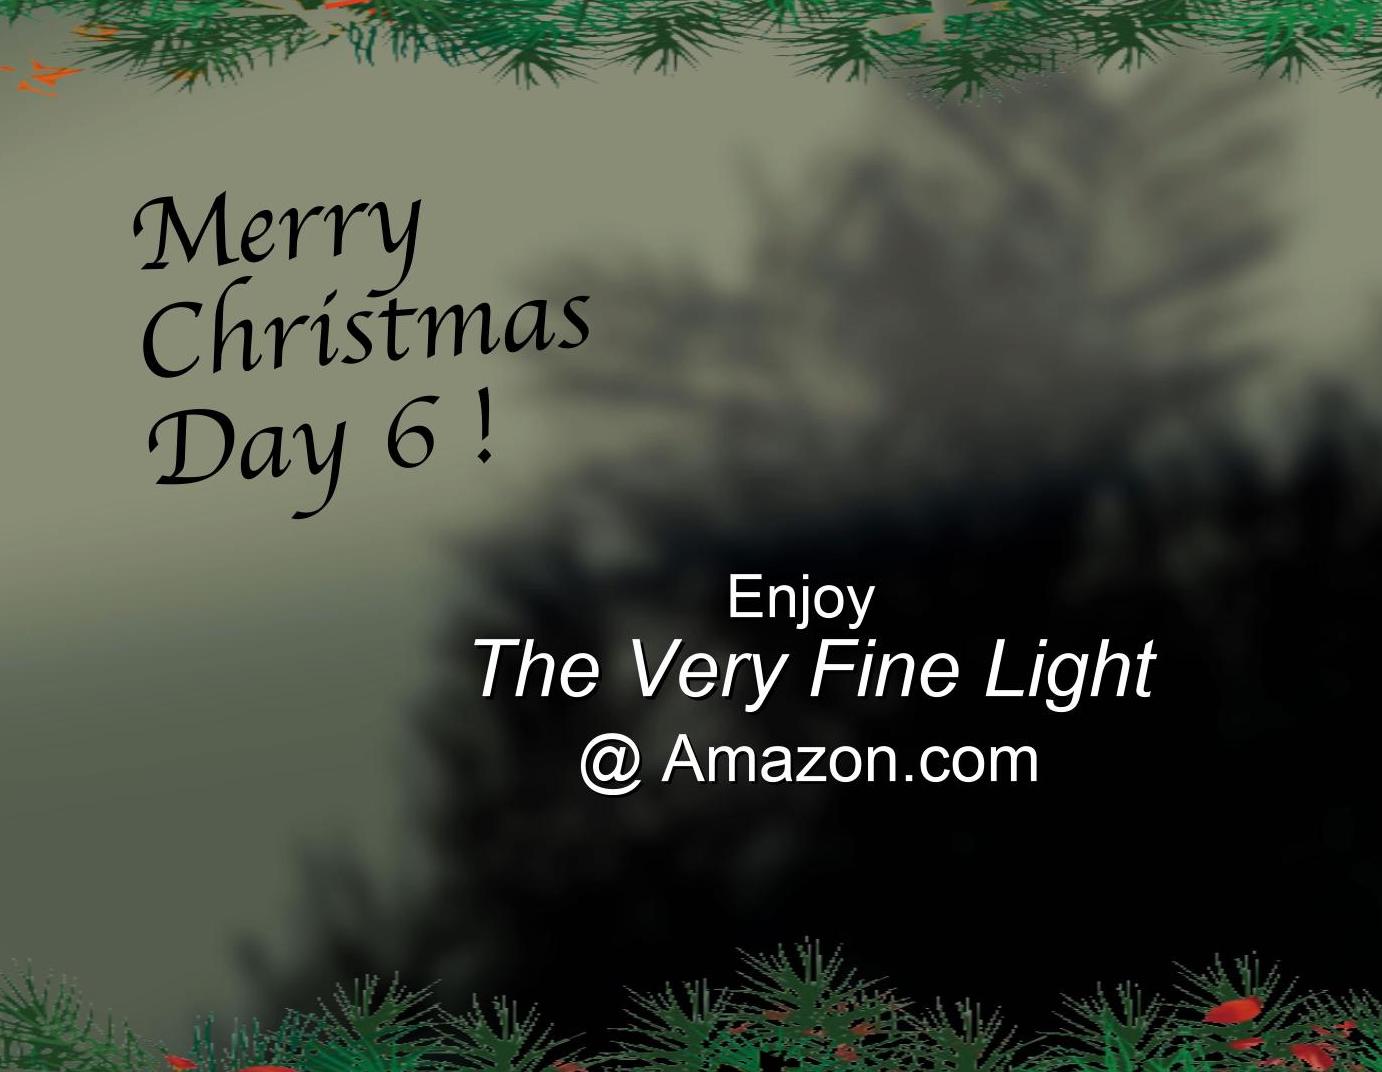 Out of focus background of evergreen tree and holly. The words read Merry Christmas Day 6. The next sentence reads, Enjoy the book The Very Fine Light on Amazon.